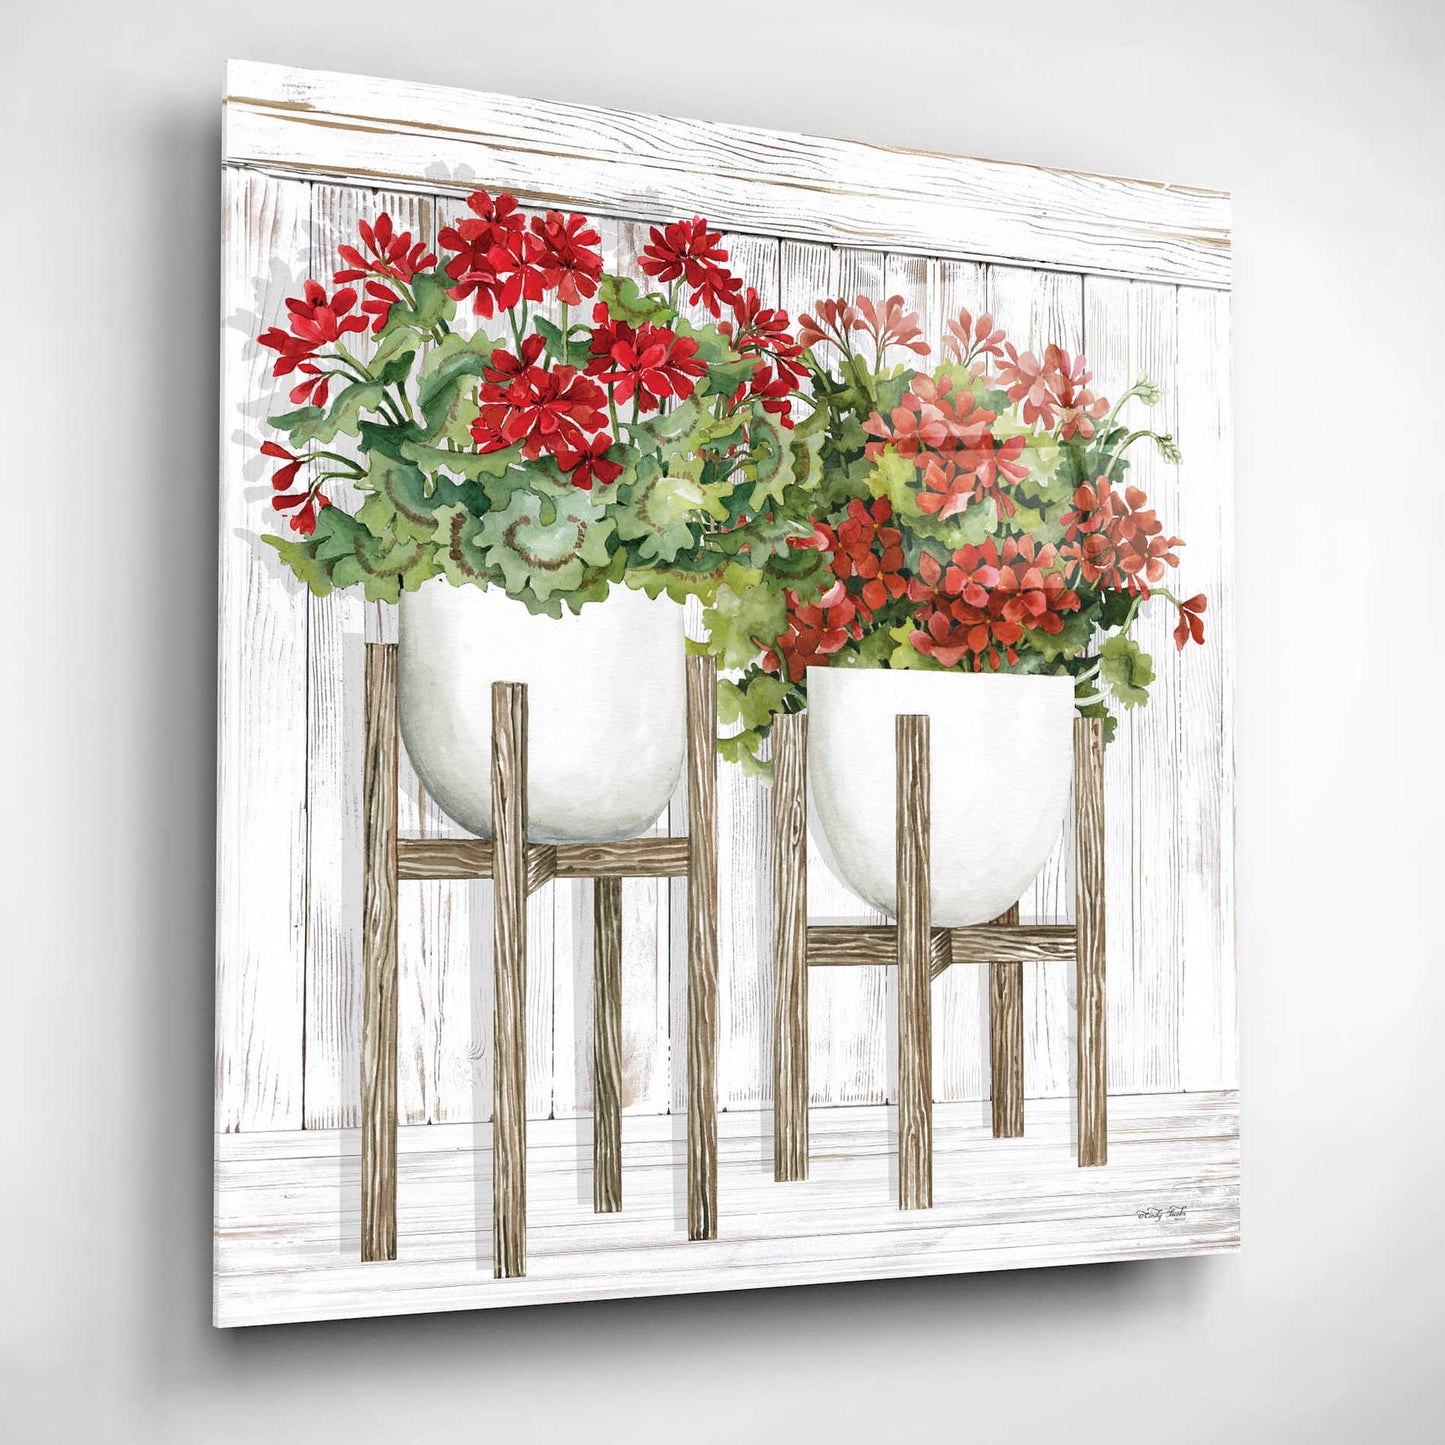 Epic Art 'Red Geraniums' by Cindy Jacobs, Acrylic Glass Wall Art,12x12